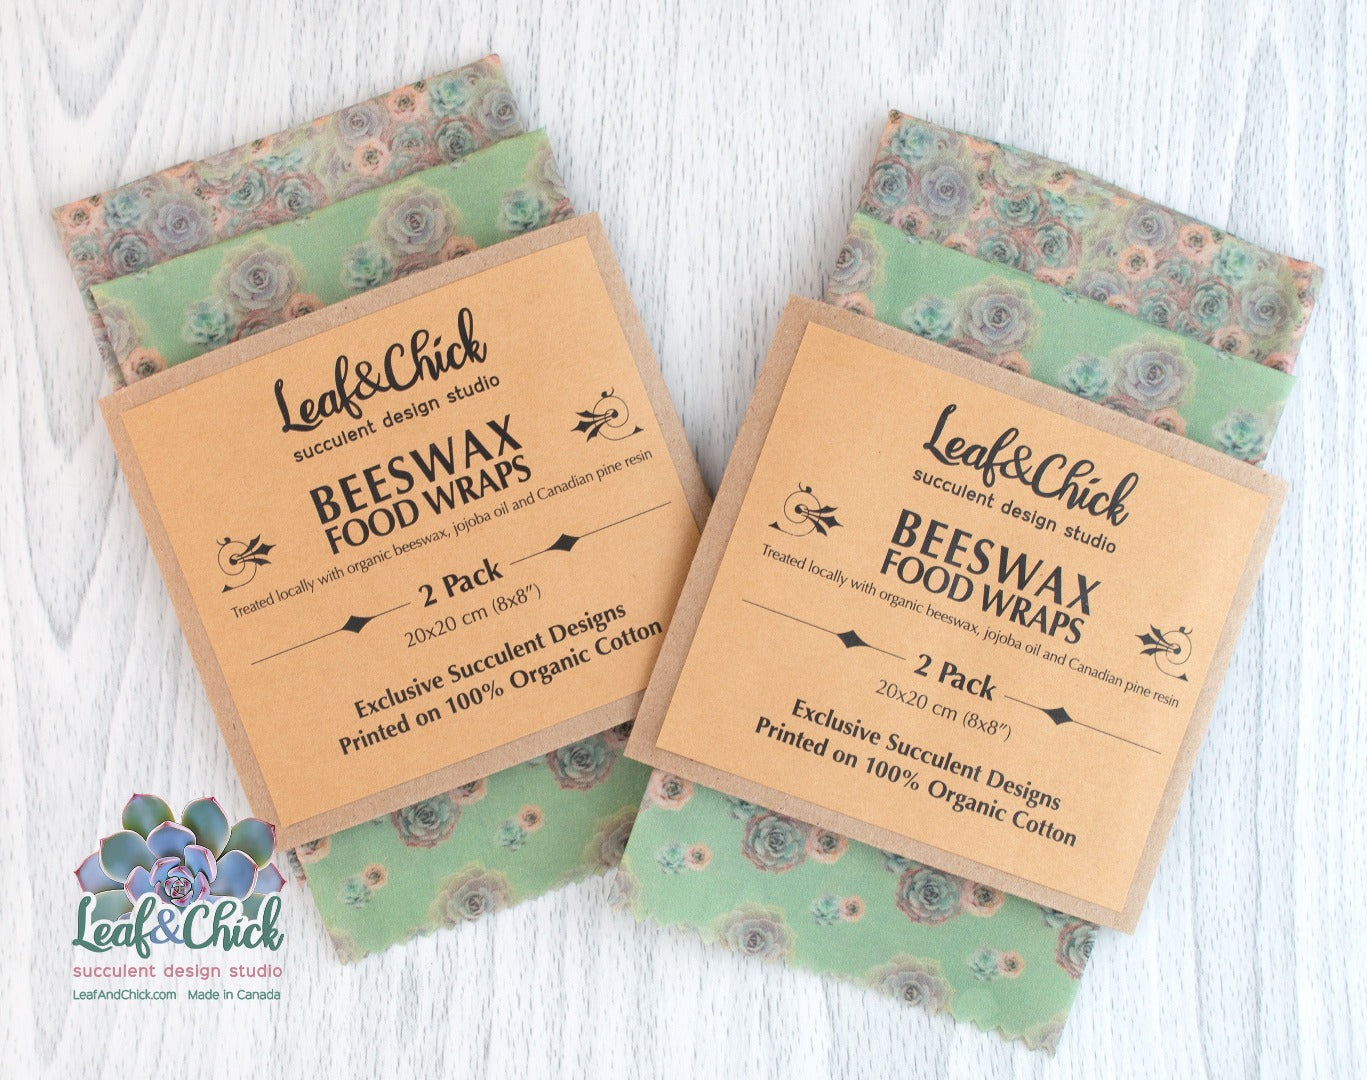 organic cotton beeswax wraps with exclusive Leaf & Chick art